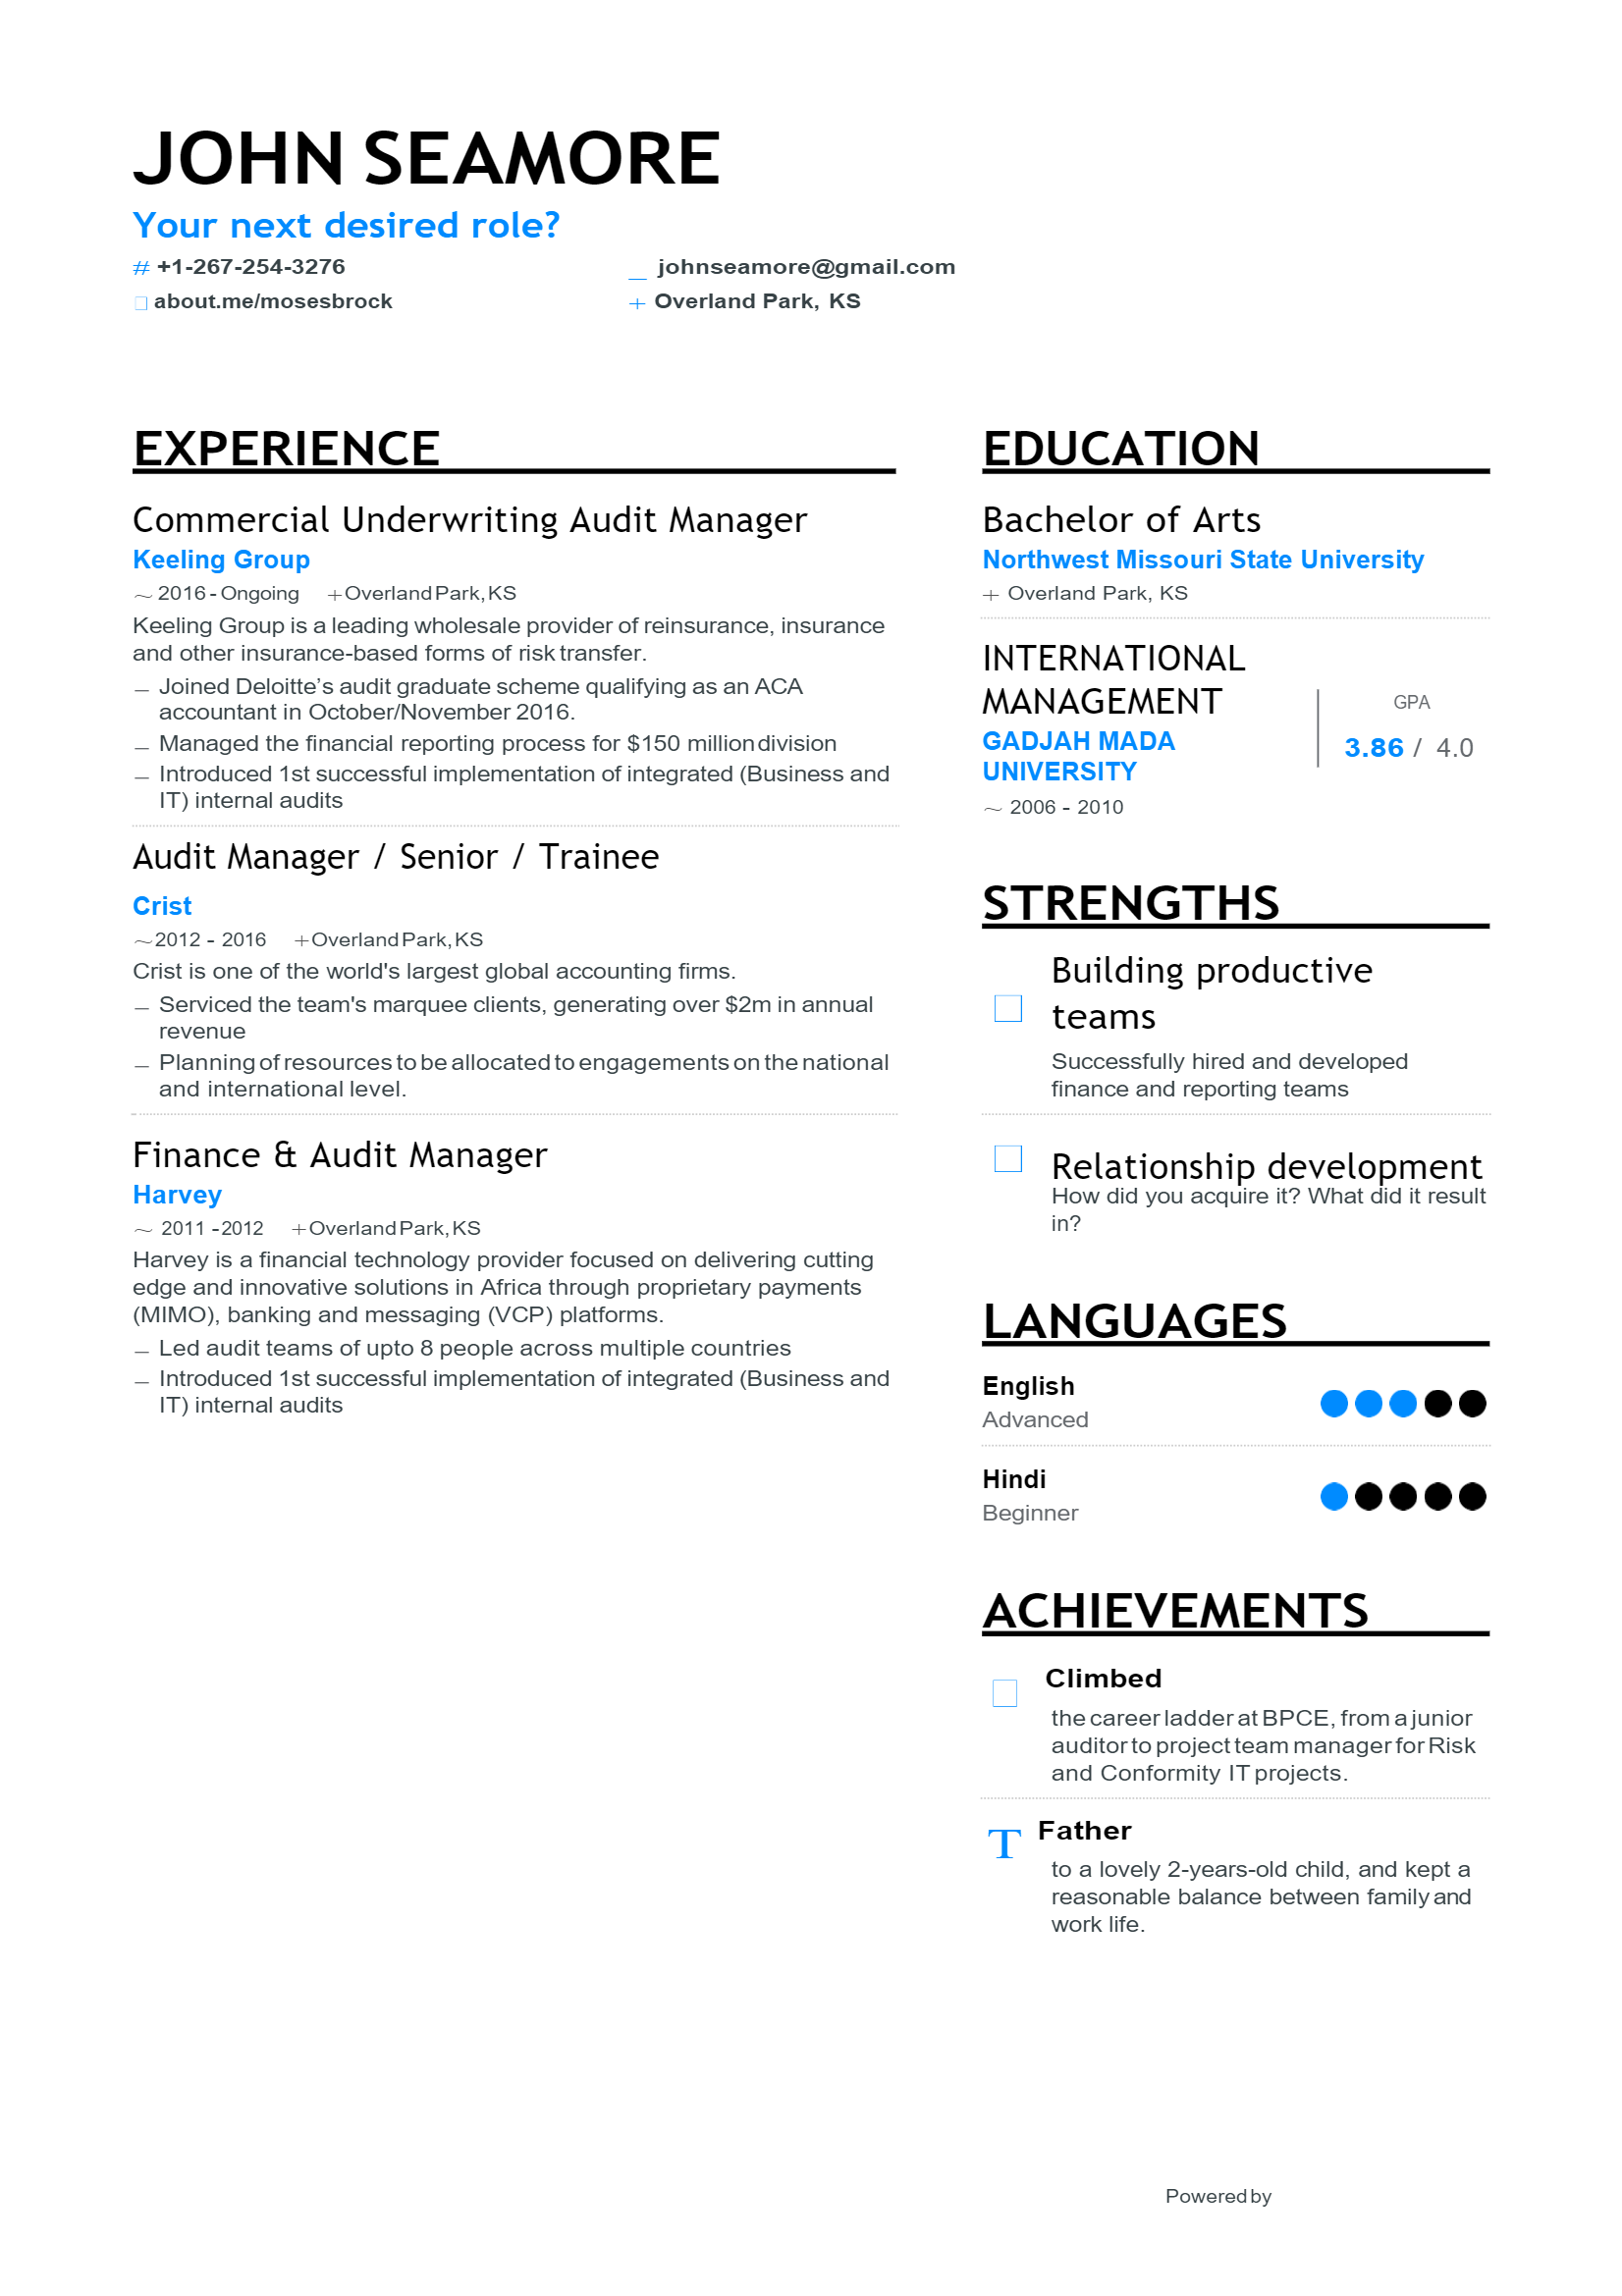 Audit Manager Resume .Docx (Word)